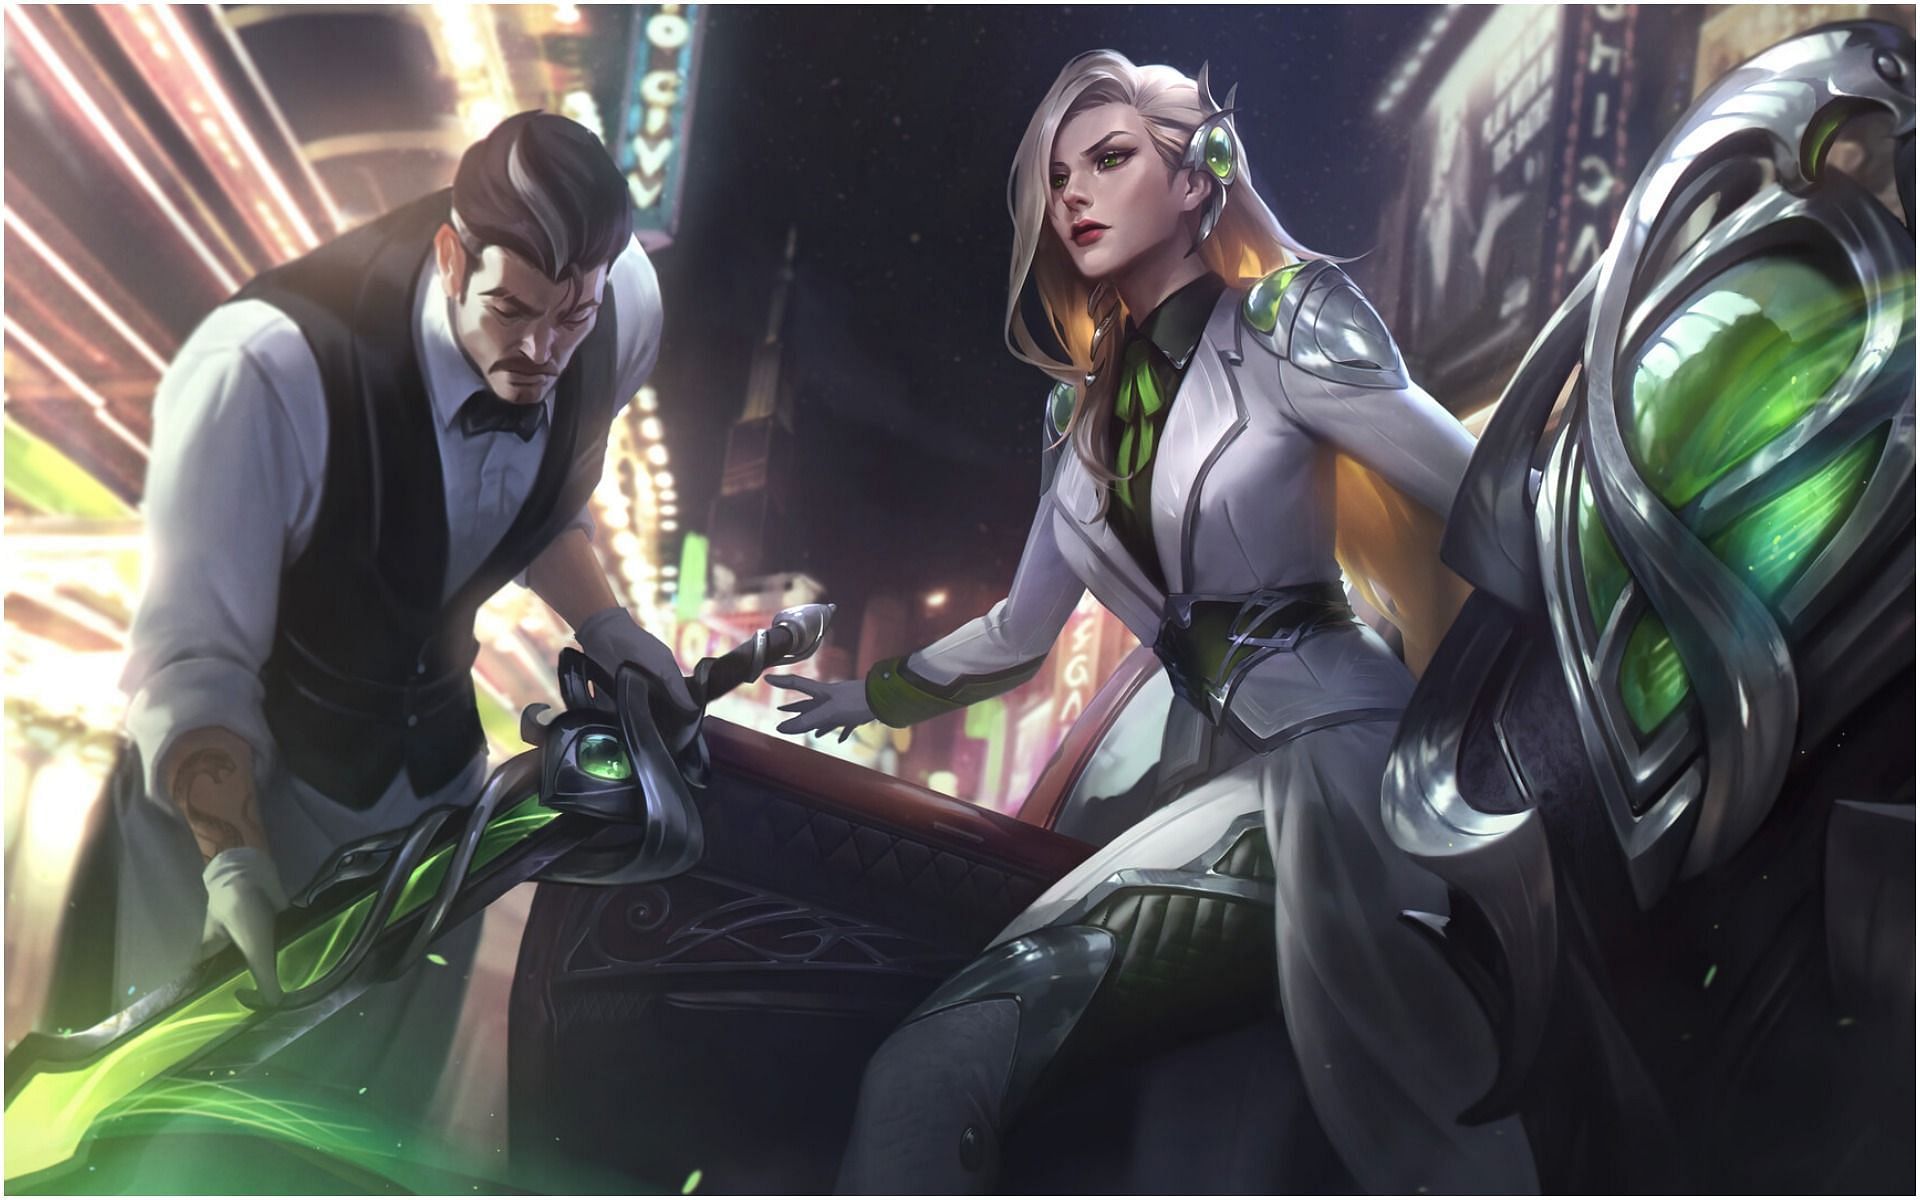 The new event point system is going to feature along with the Debonair event (Image via League of Legends)